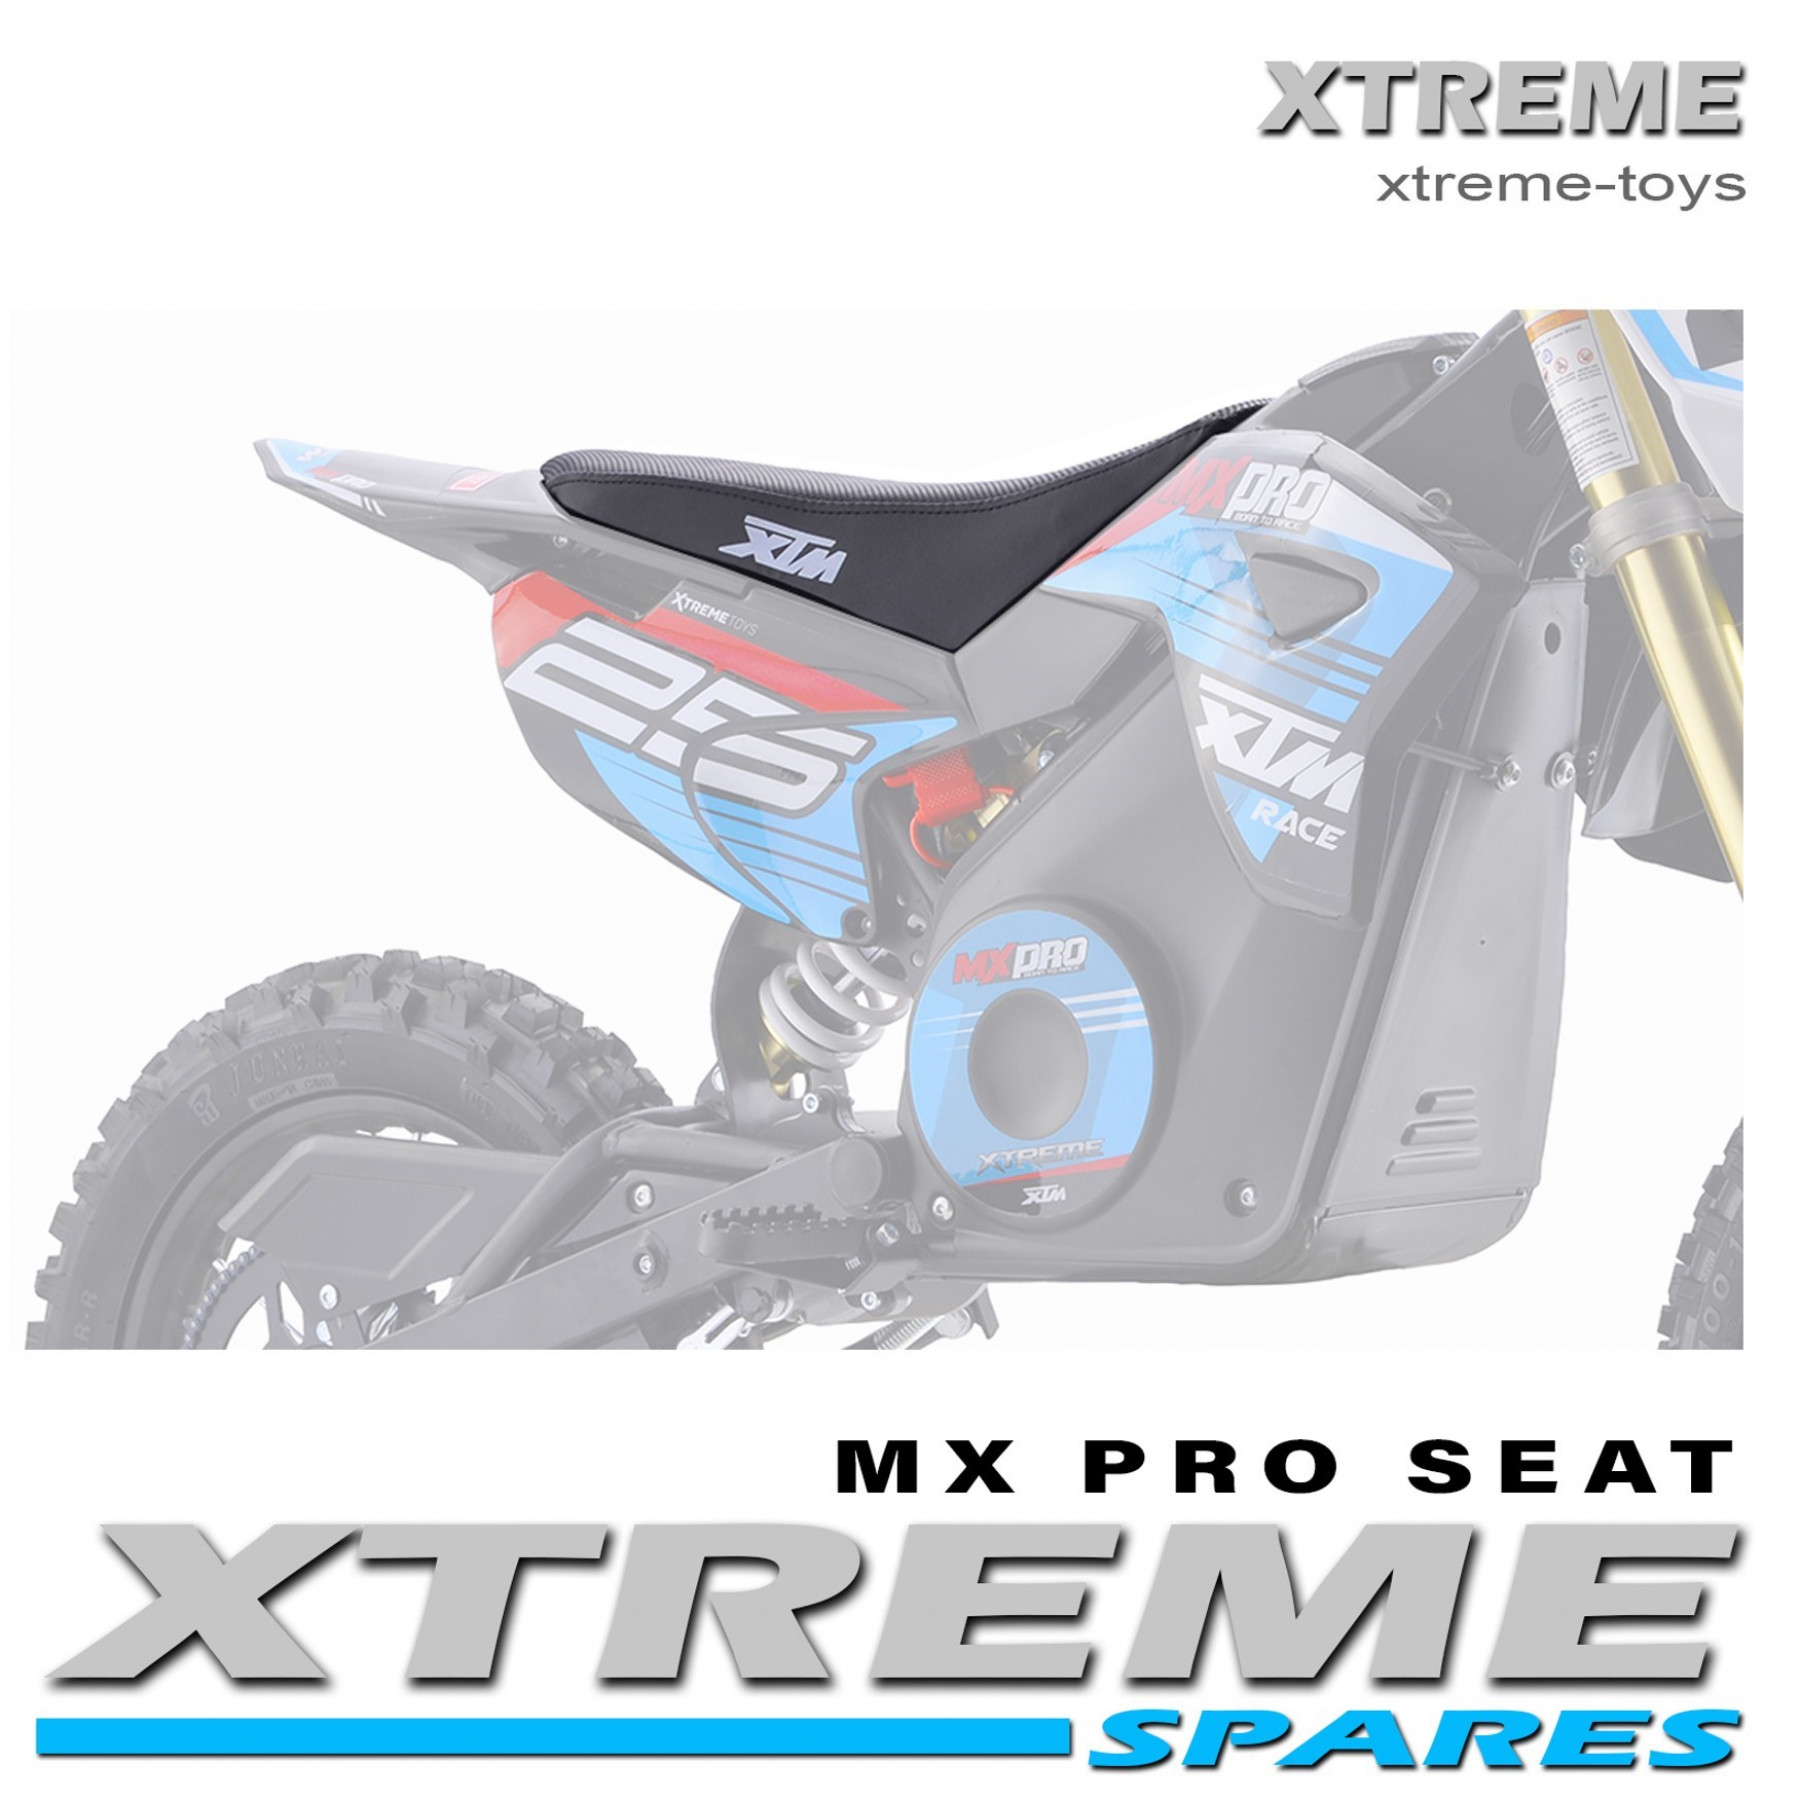 XTREME ELECTRIC XTM MX-PRO REPLACEMENT SEAT